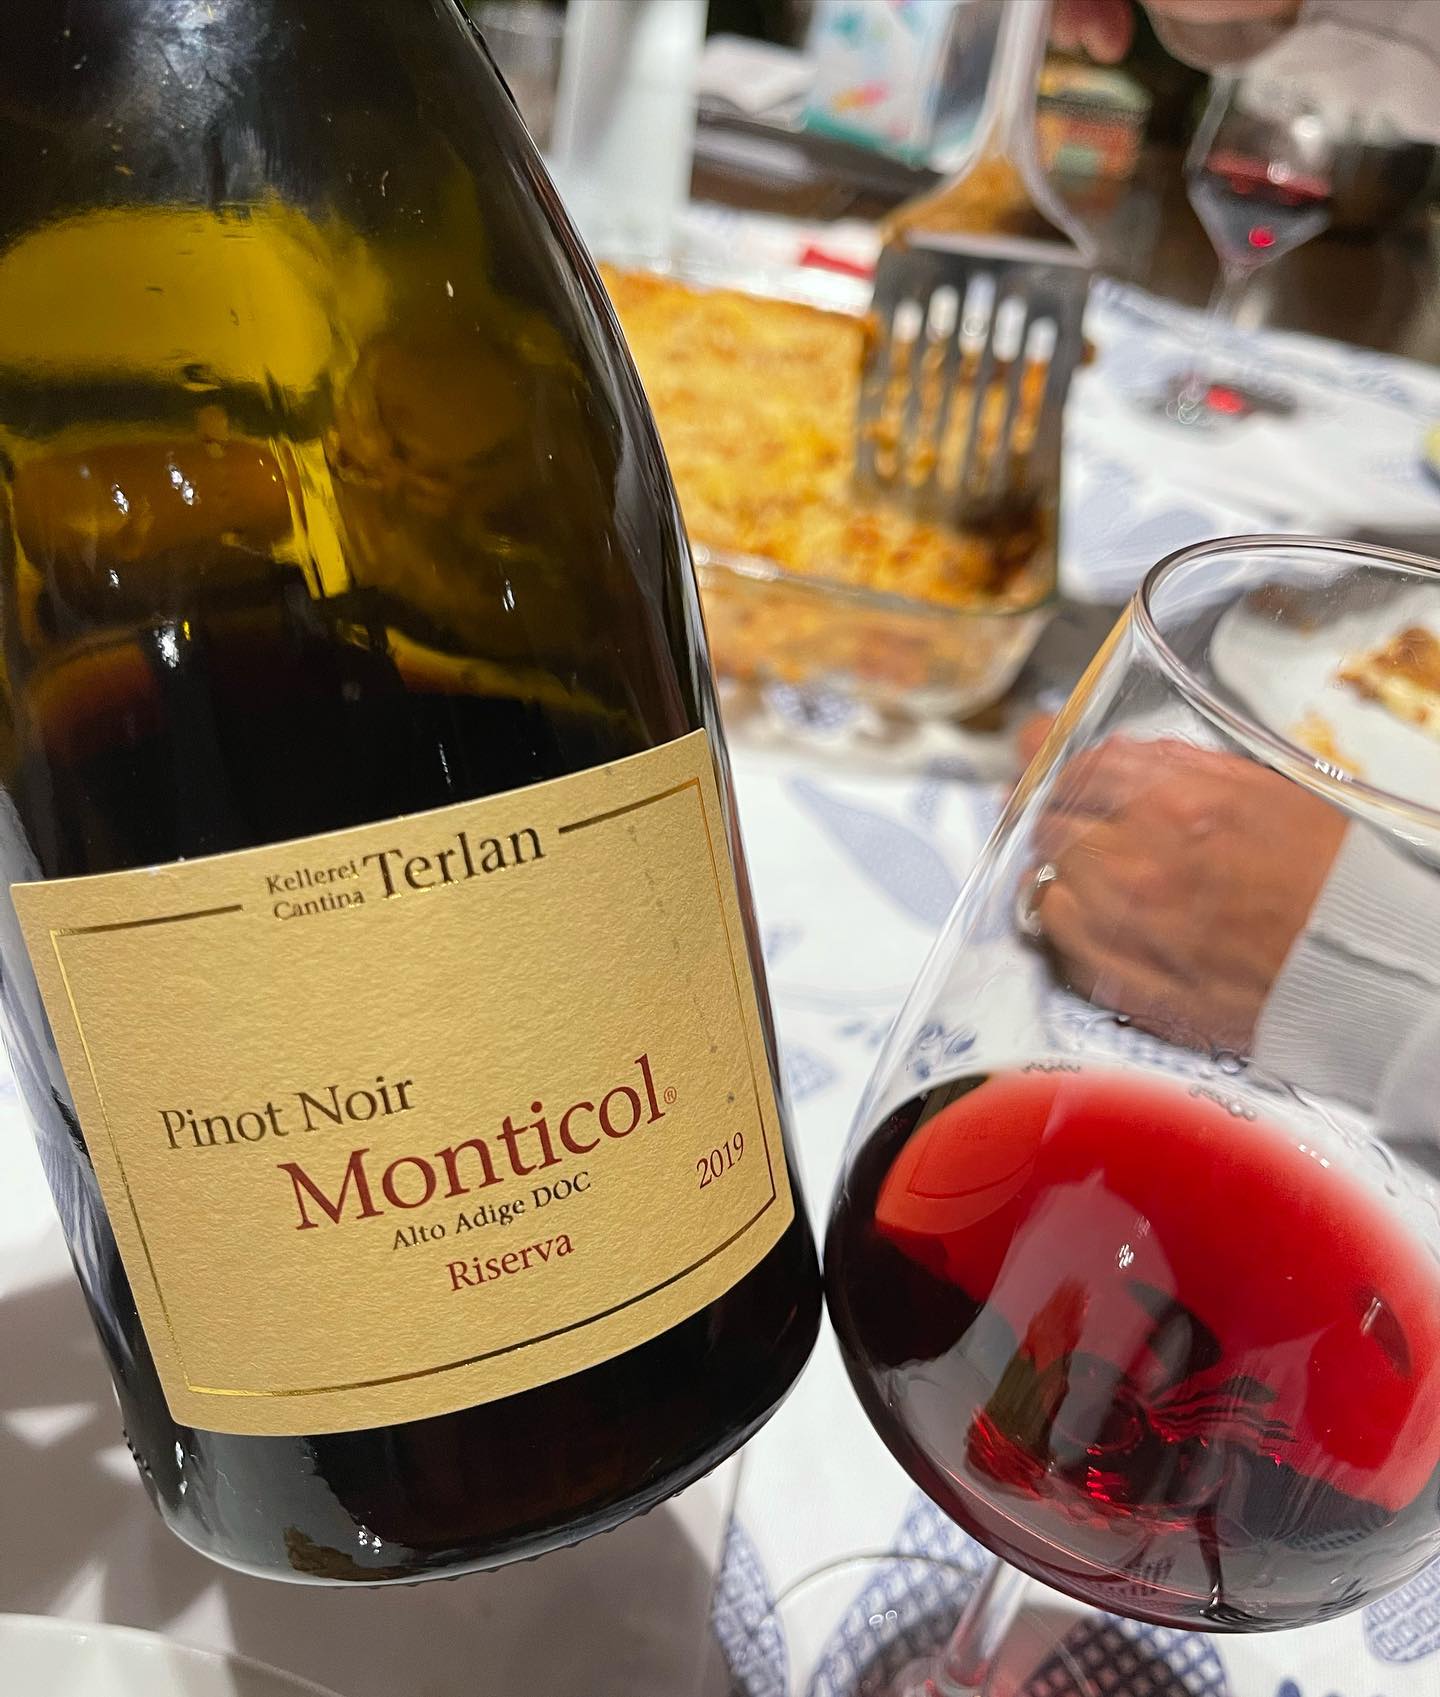 @monicalarner suggested Asiago cheese to go with the translucent and powerful Monticol Pinot Noir Riserva from @cantinaterlano.
Even some majestic lasagna however works wonderfully!
#altoadige #italianwine #foodandwine #redwine #pinotnoir #aucklandrestaurant